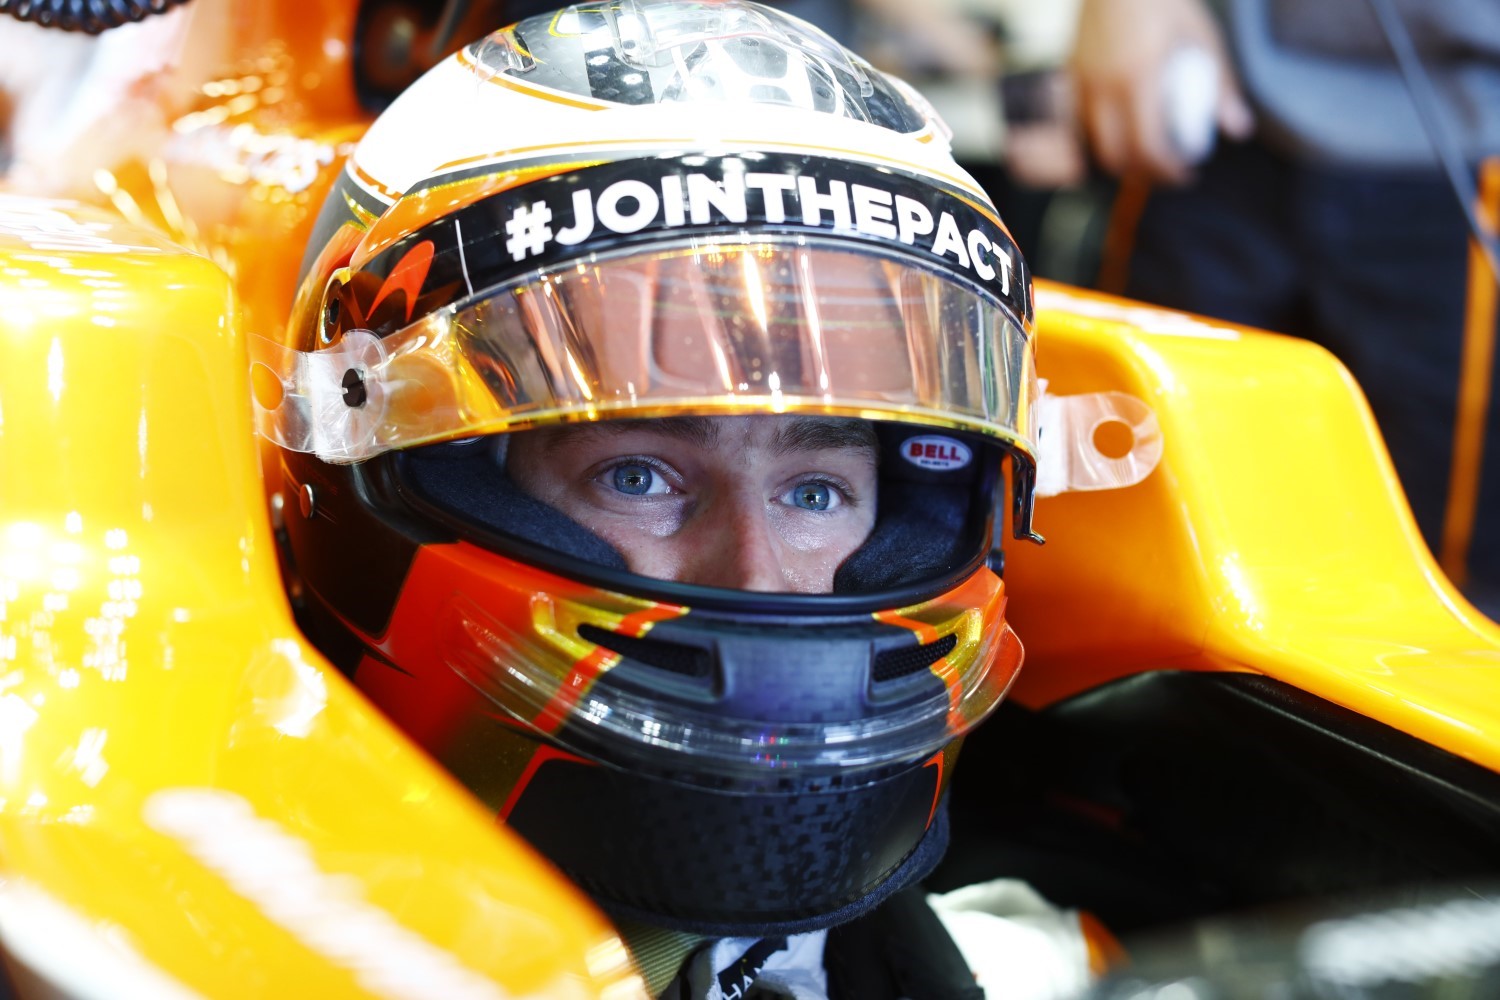 Stoffel Vandoorne. F1's British media would love for Vettel to get banned so Hamilton can win title.